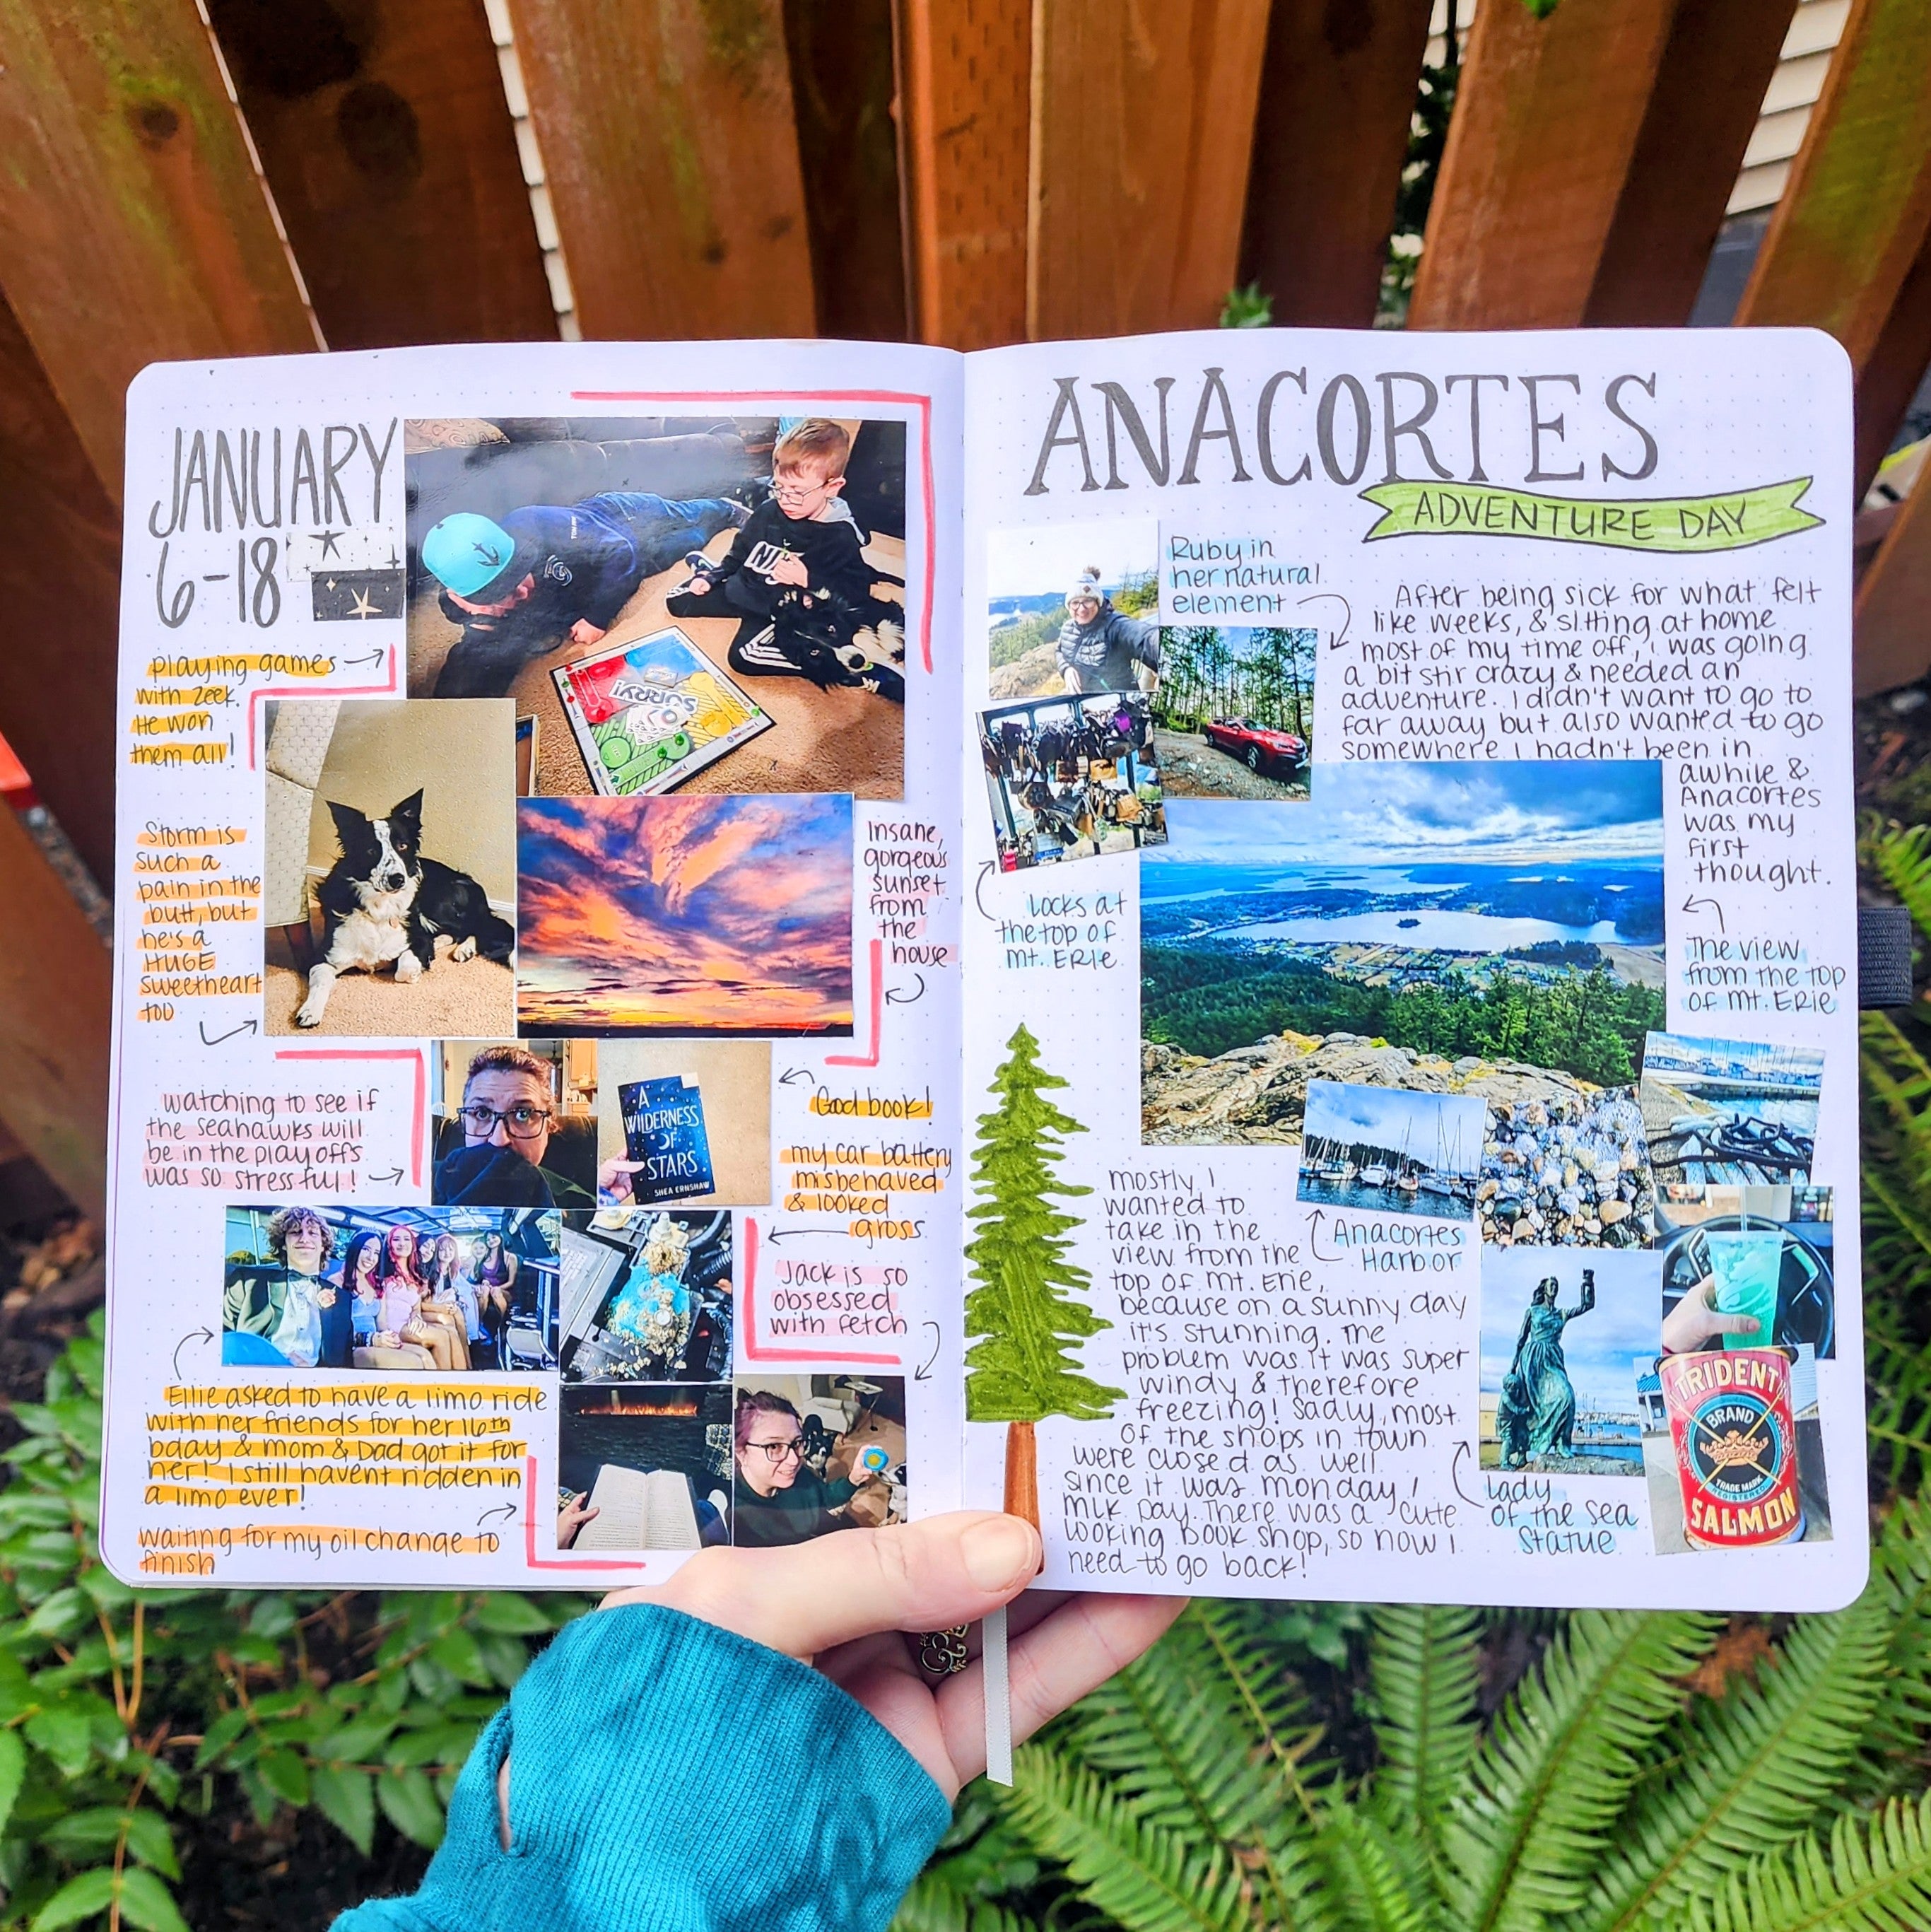 Documenting special events in a bullet journal using photos